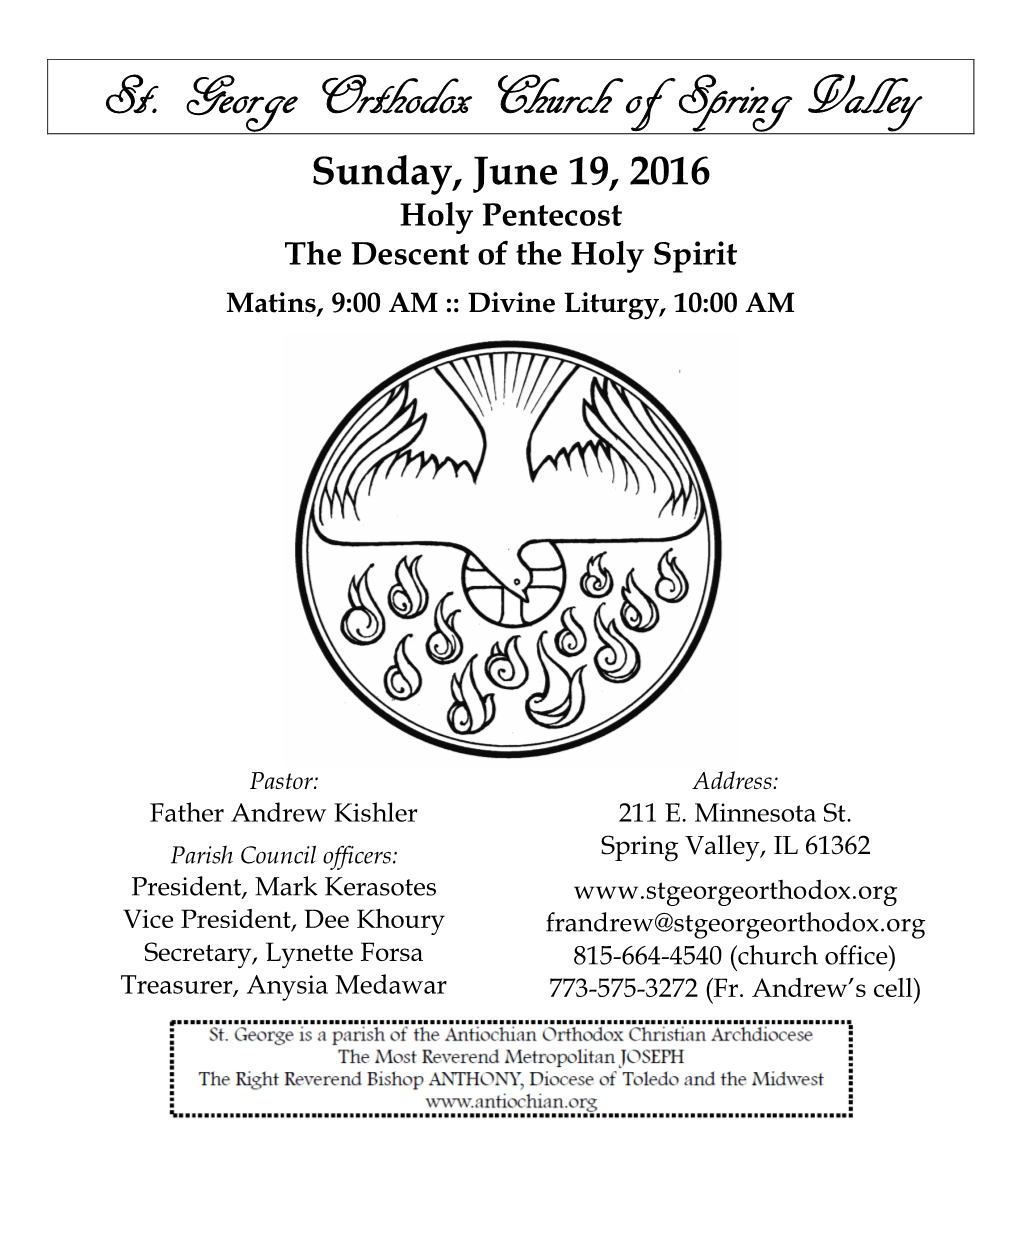 St. George Orthodox Church of Spring Valley Sunday, June 19, 2016 Holy Pentecost the Descent of the Holy Spirit Matins, 9:00 AM :: Divine Liturgy, 10:00 AM